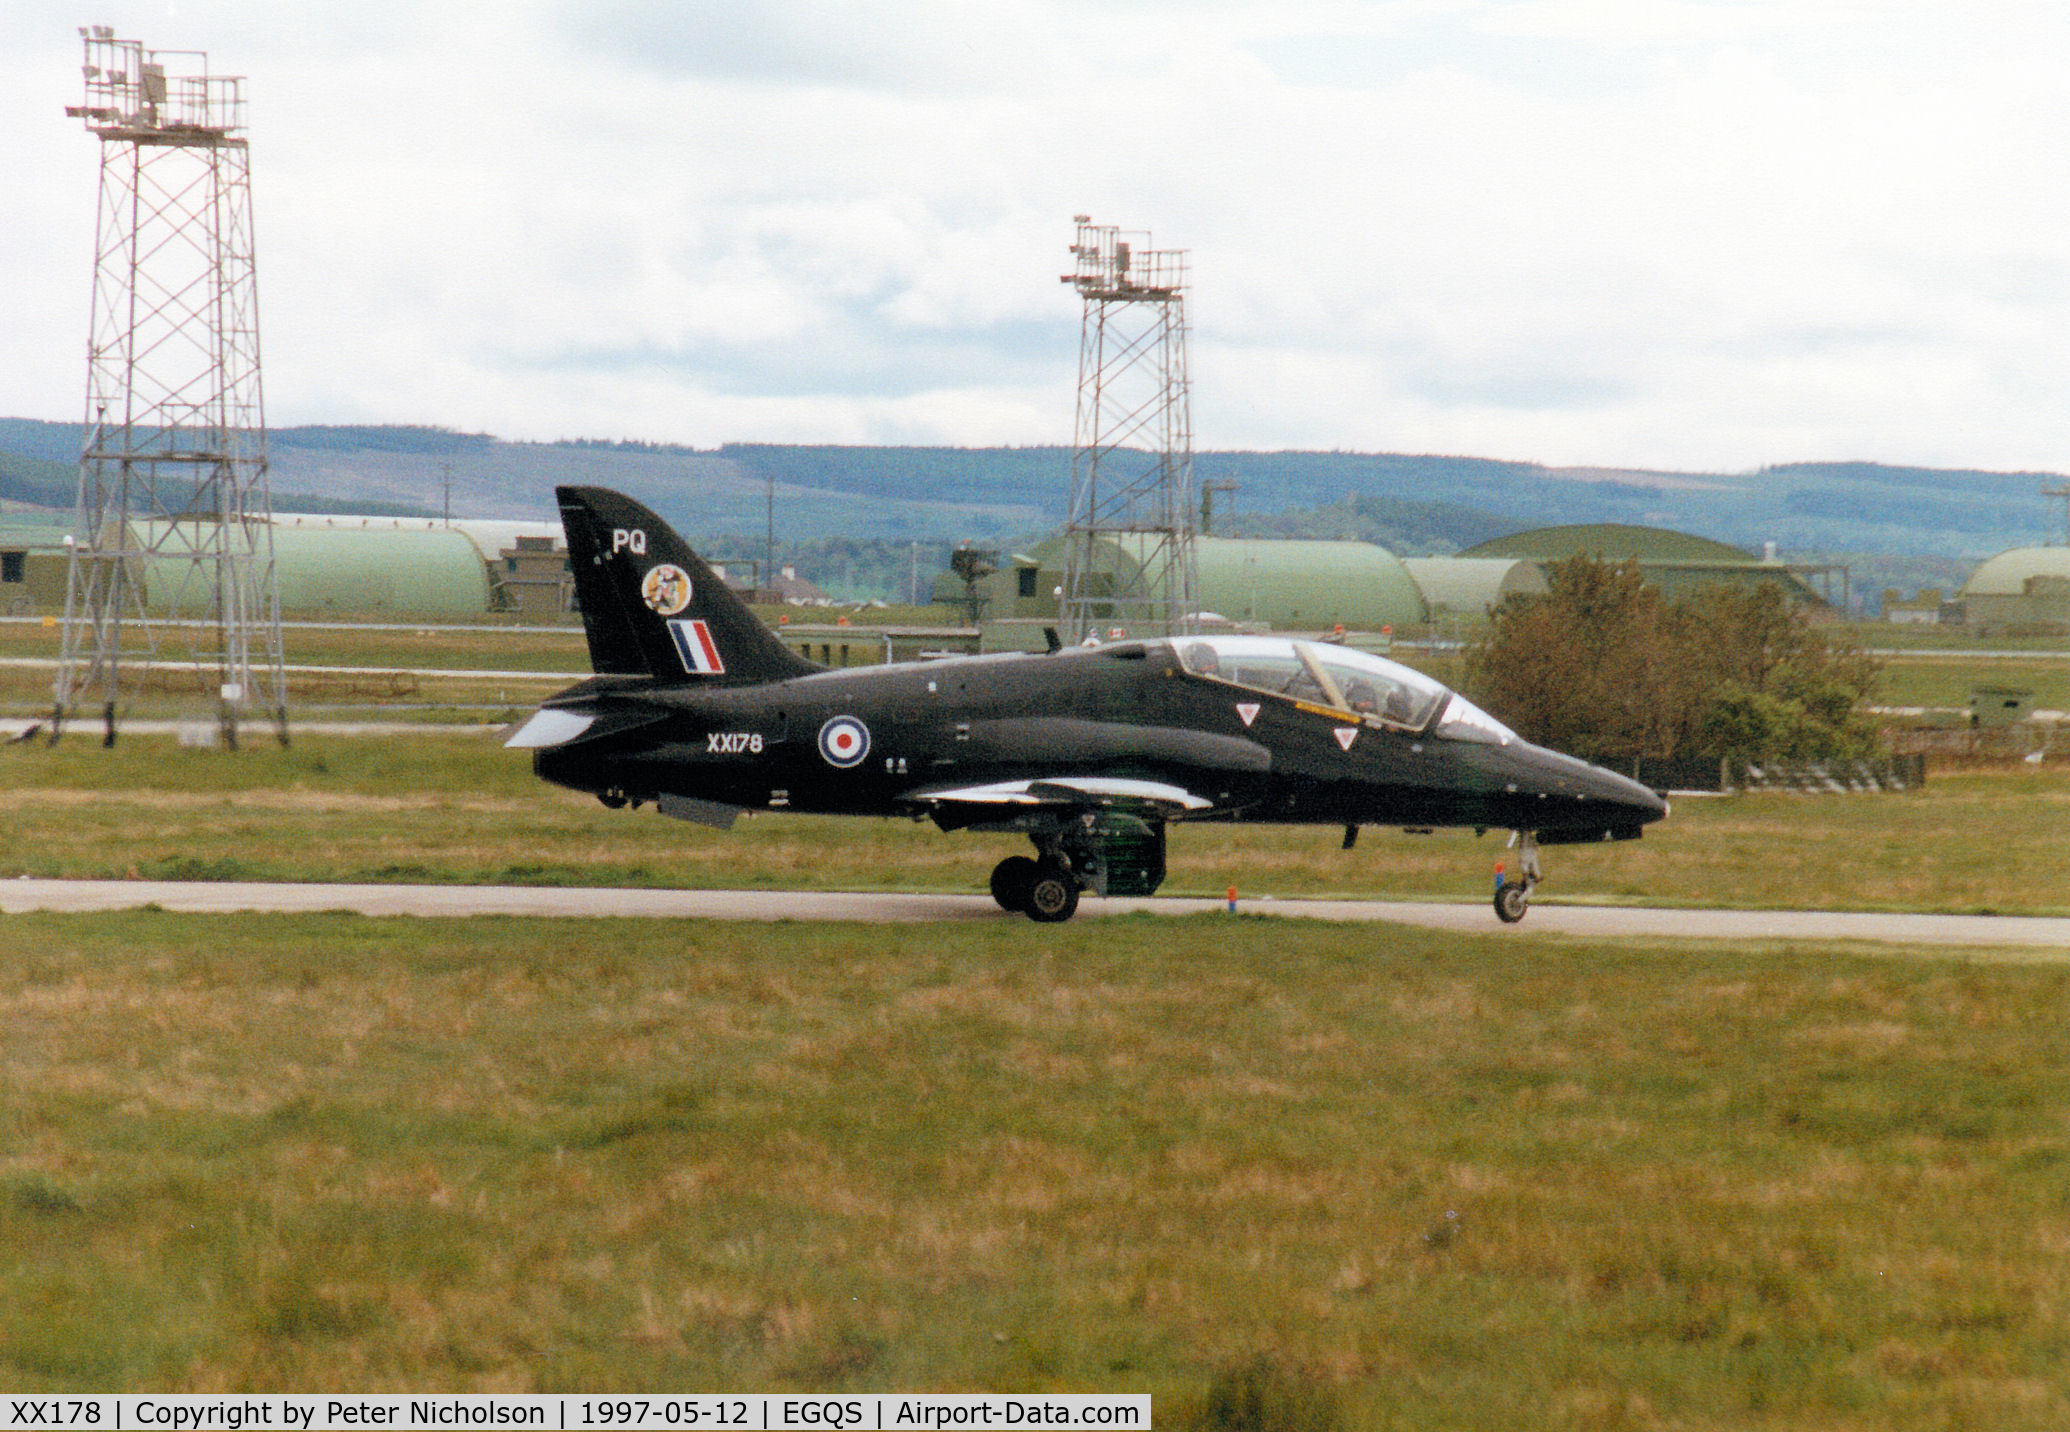 XX178, 1977 Hawker Siddeley Hawk T.1W C/N 025/312025, Hawk T.1 of 19[Reserve] Squadron at RAF Valley preparing to join Runway 23 at RAF Lossiemouth in May 1997.